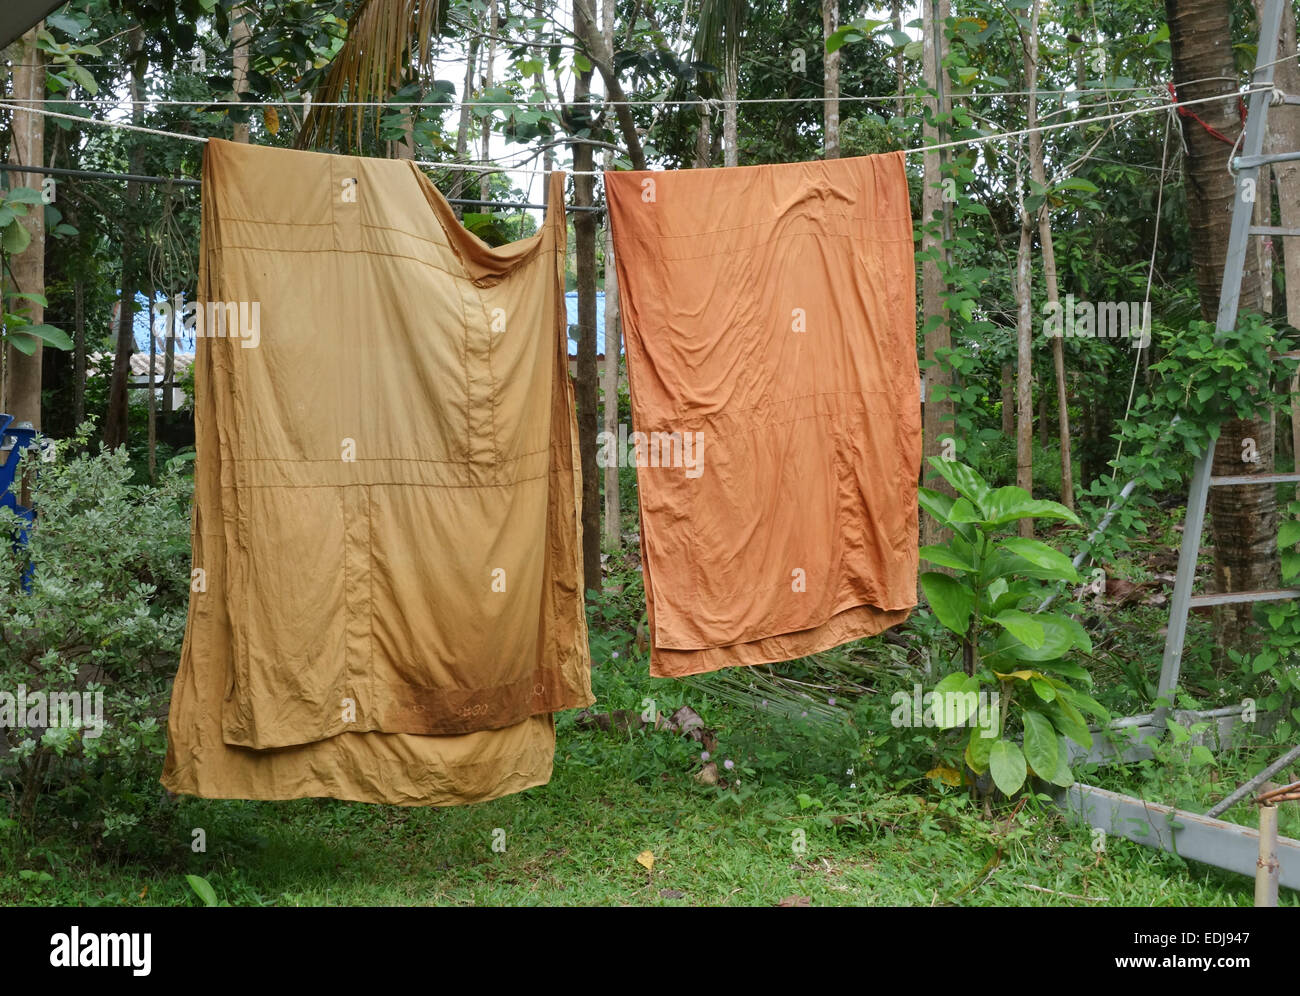 Two monk's robes drying, Lanta Old Town Buddhist temple, forest monastery, Koh Lanta Thailand, Southeast Asia. Stock Photo